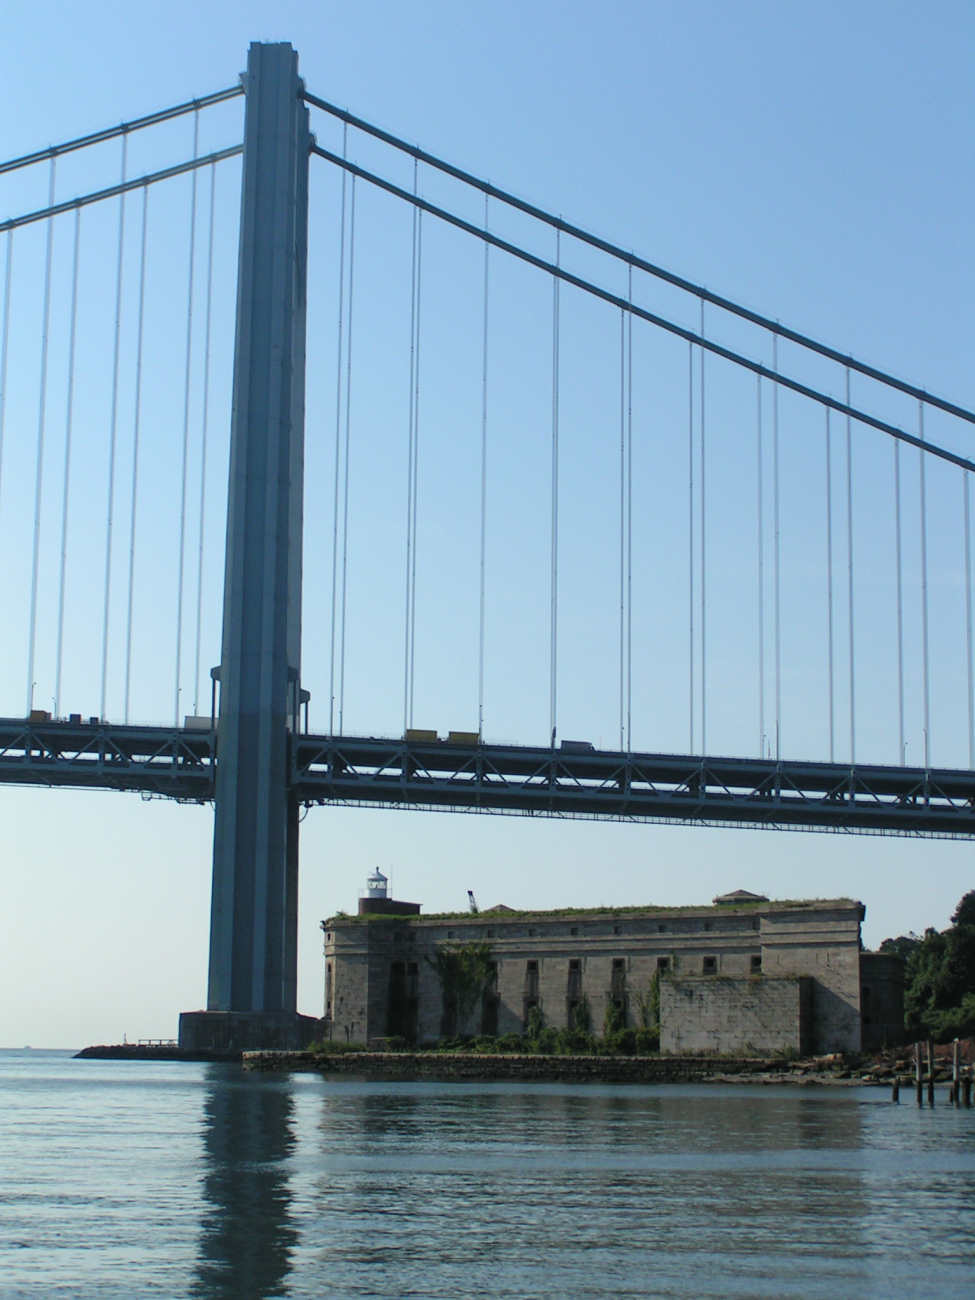 The west pier of the Verrazano-Narrows Bridge with Fort Wadsworth in theforeground